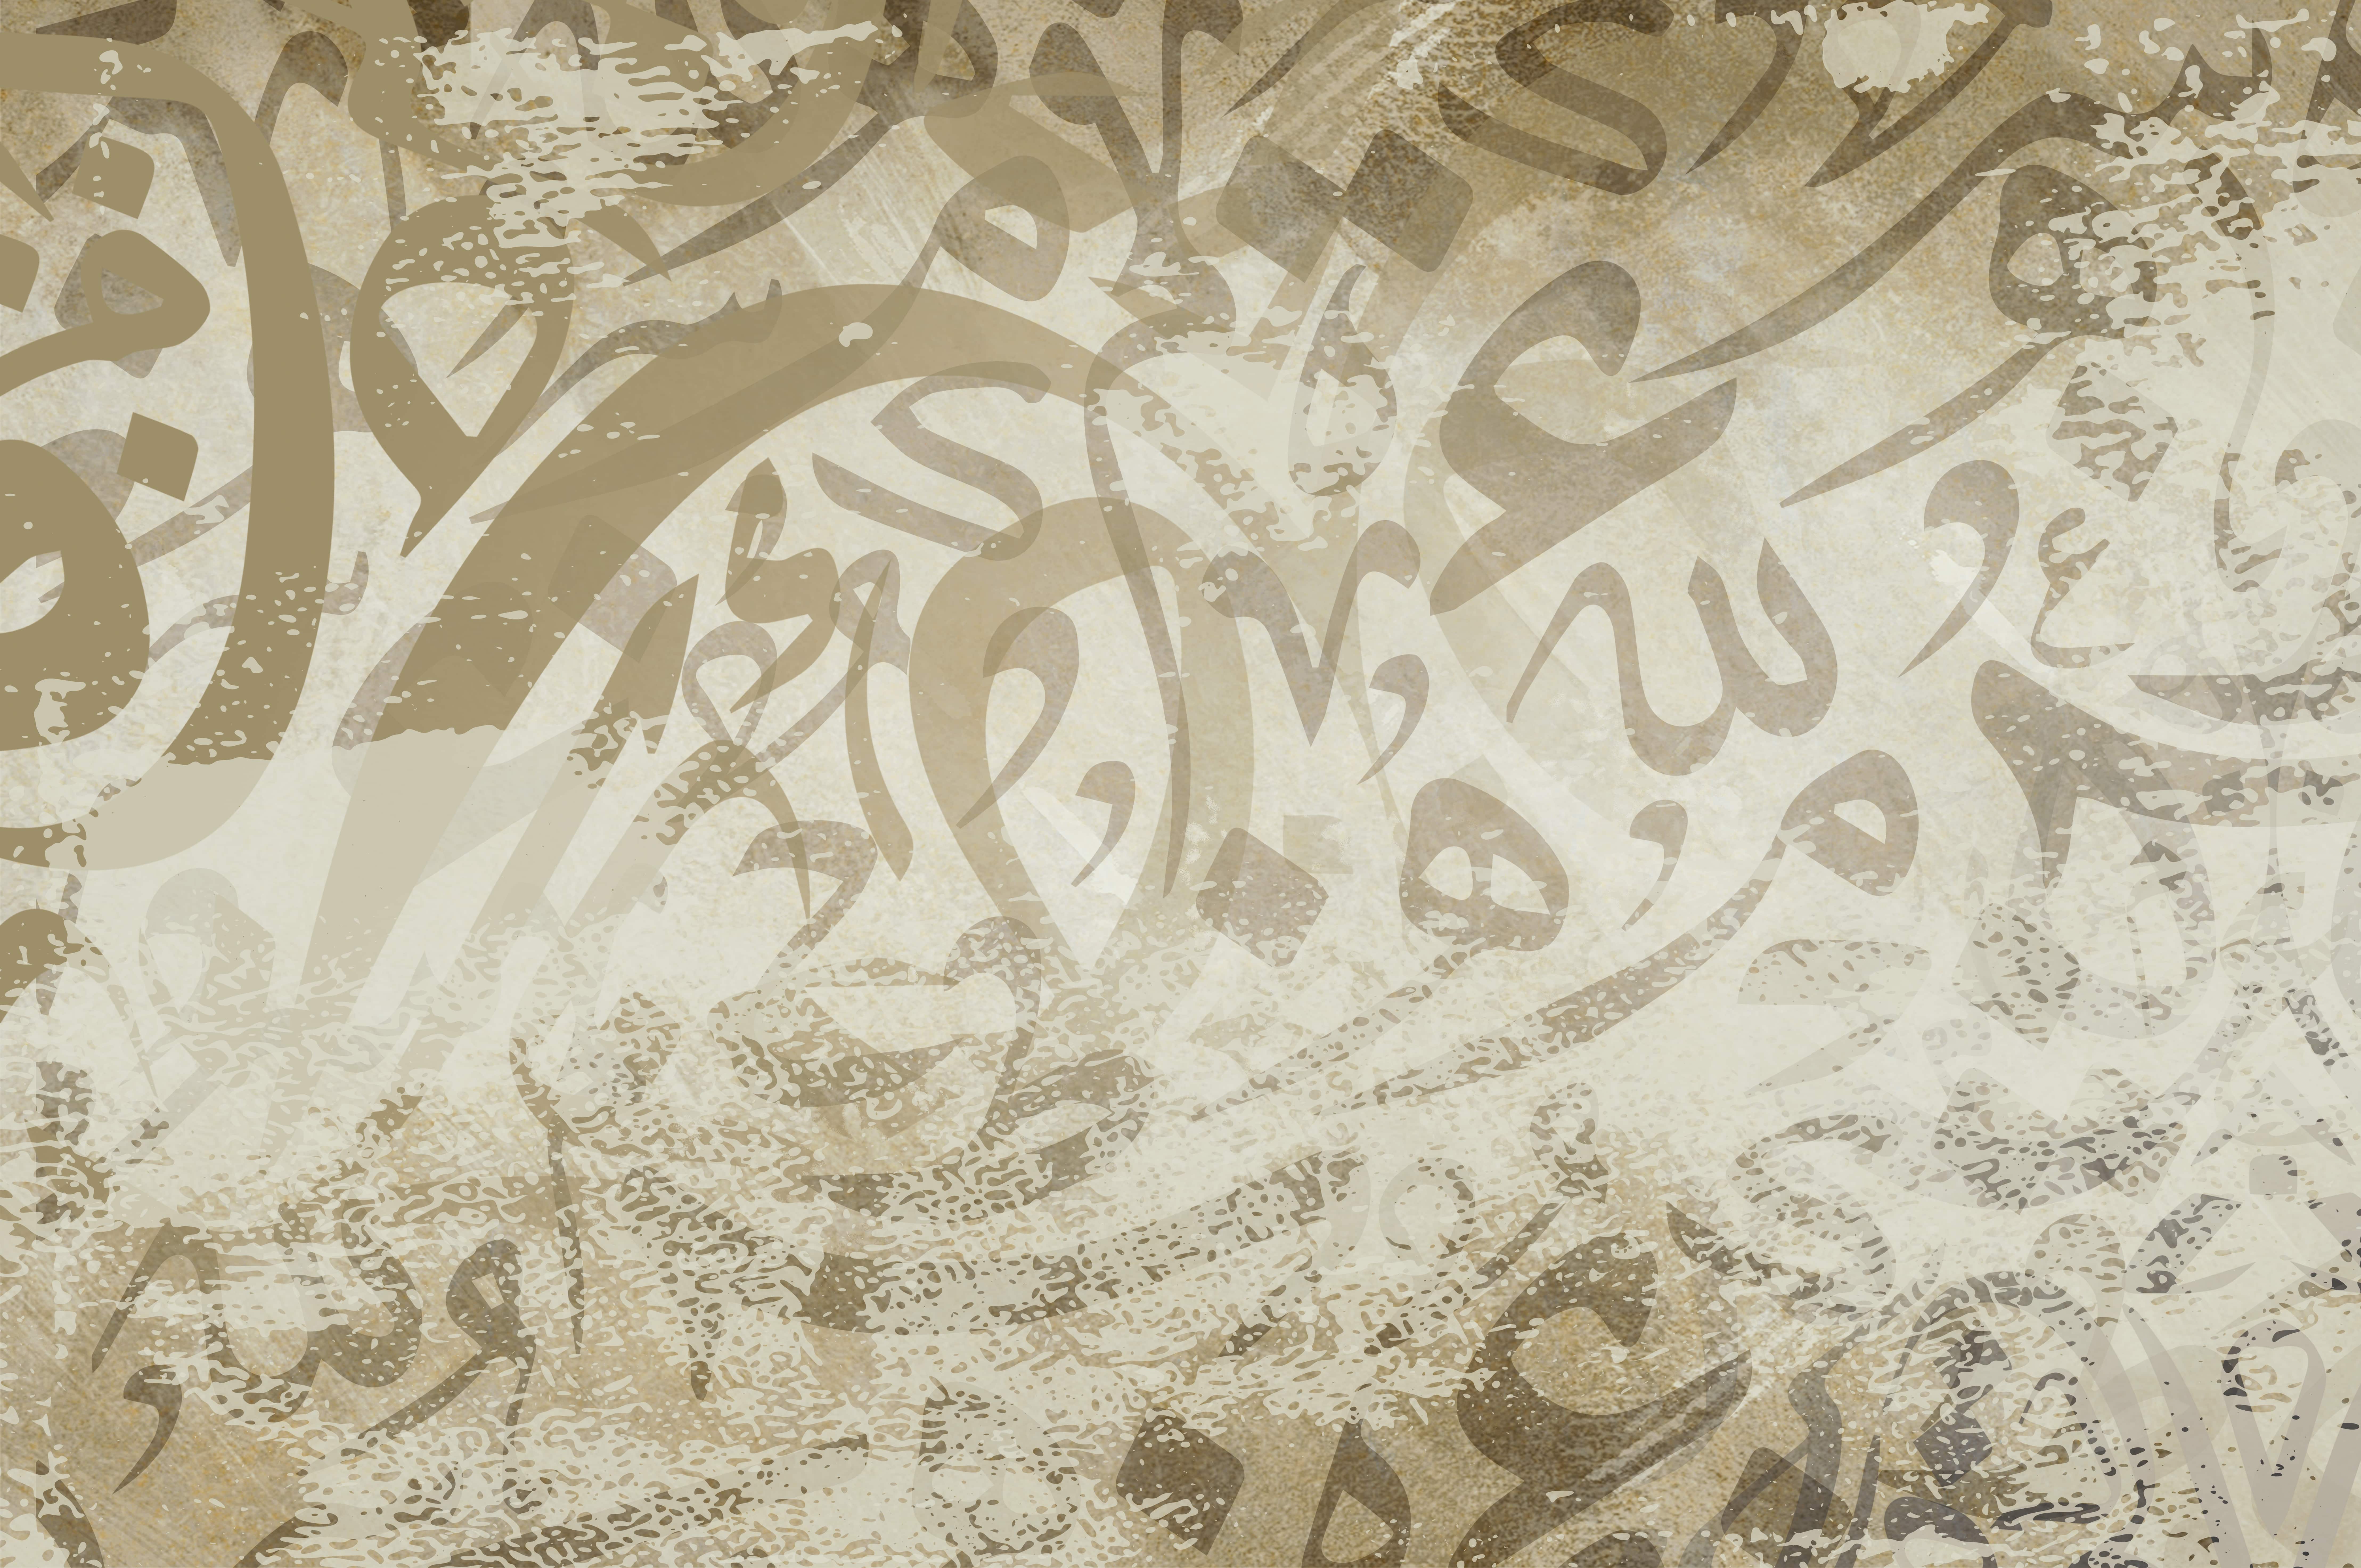 arabic-calligraphy-wallpaper-white-wall-with-overlapping-old-paper-background-min